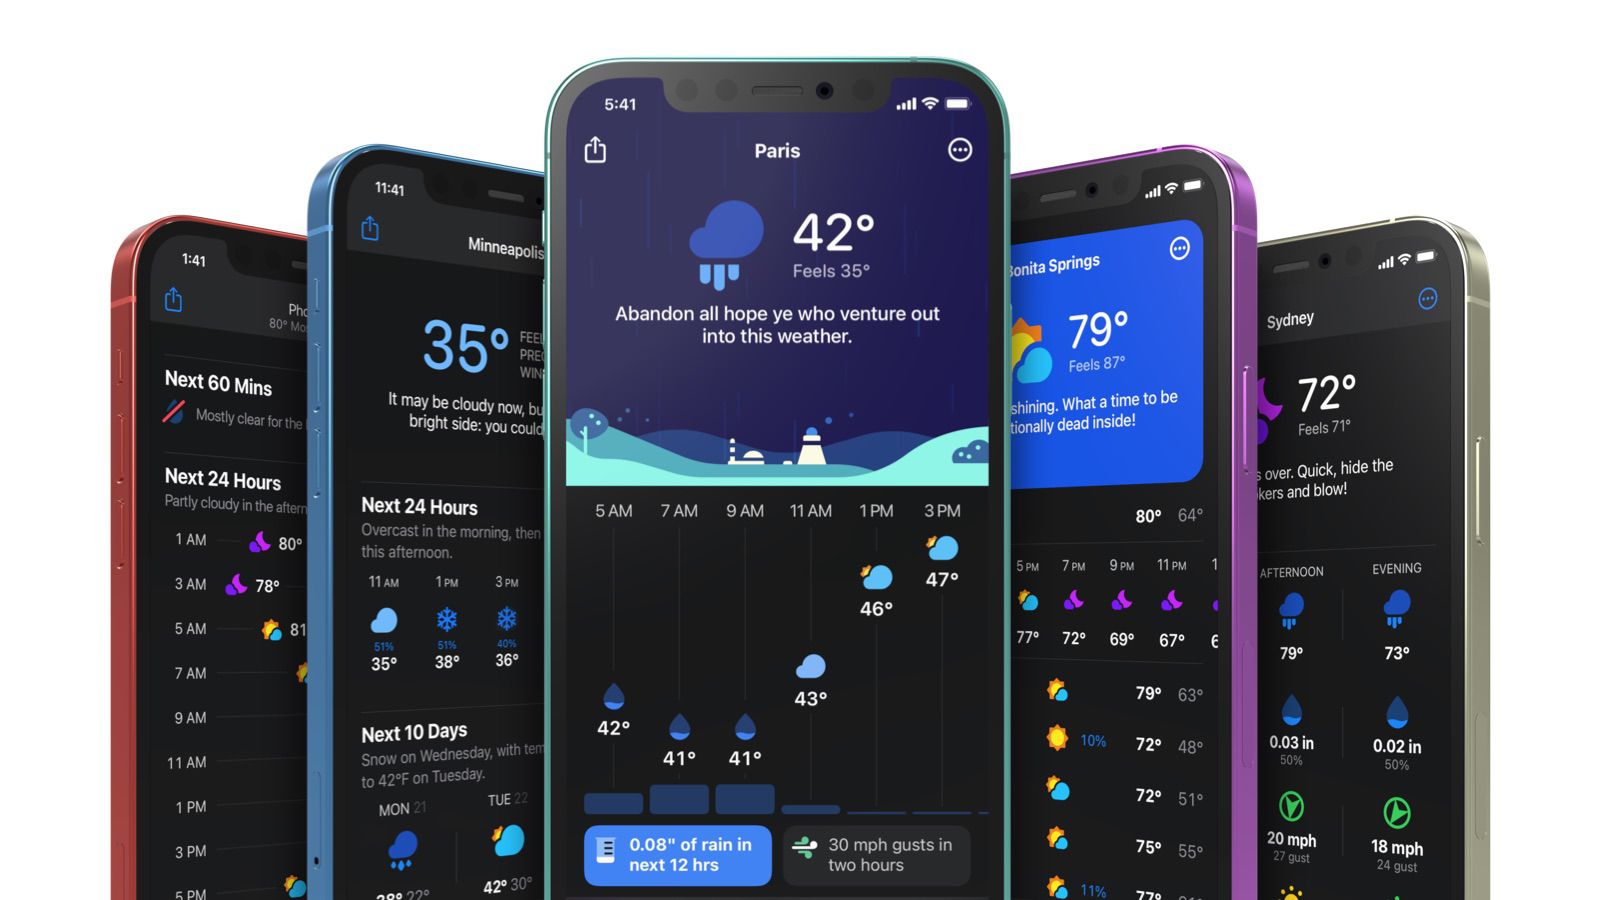 CARROT Weather 5.0 is launched with a new design, more dialogue options and Snarky customization